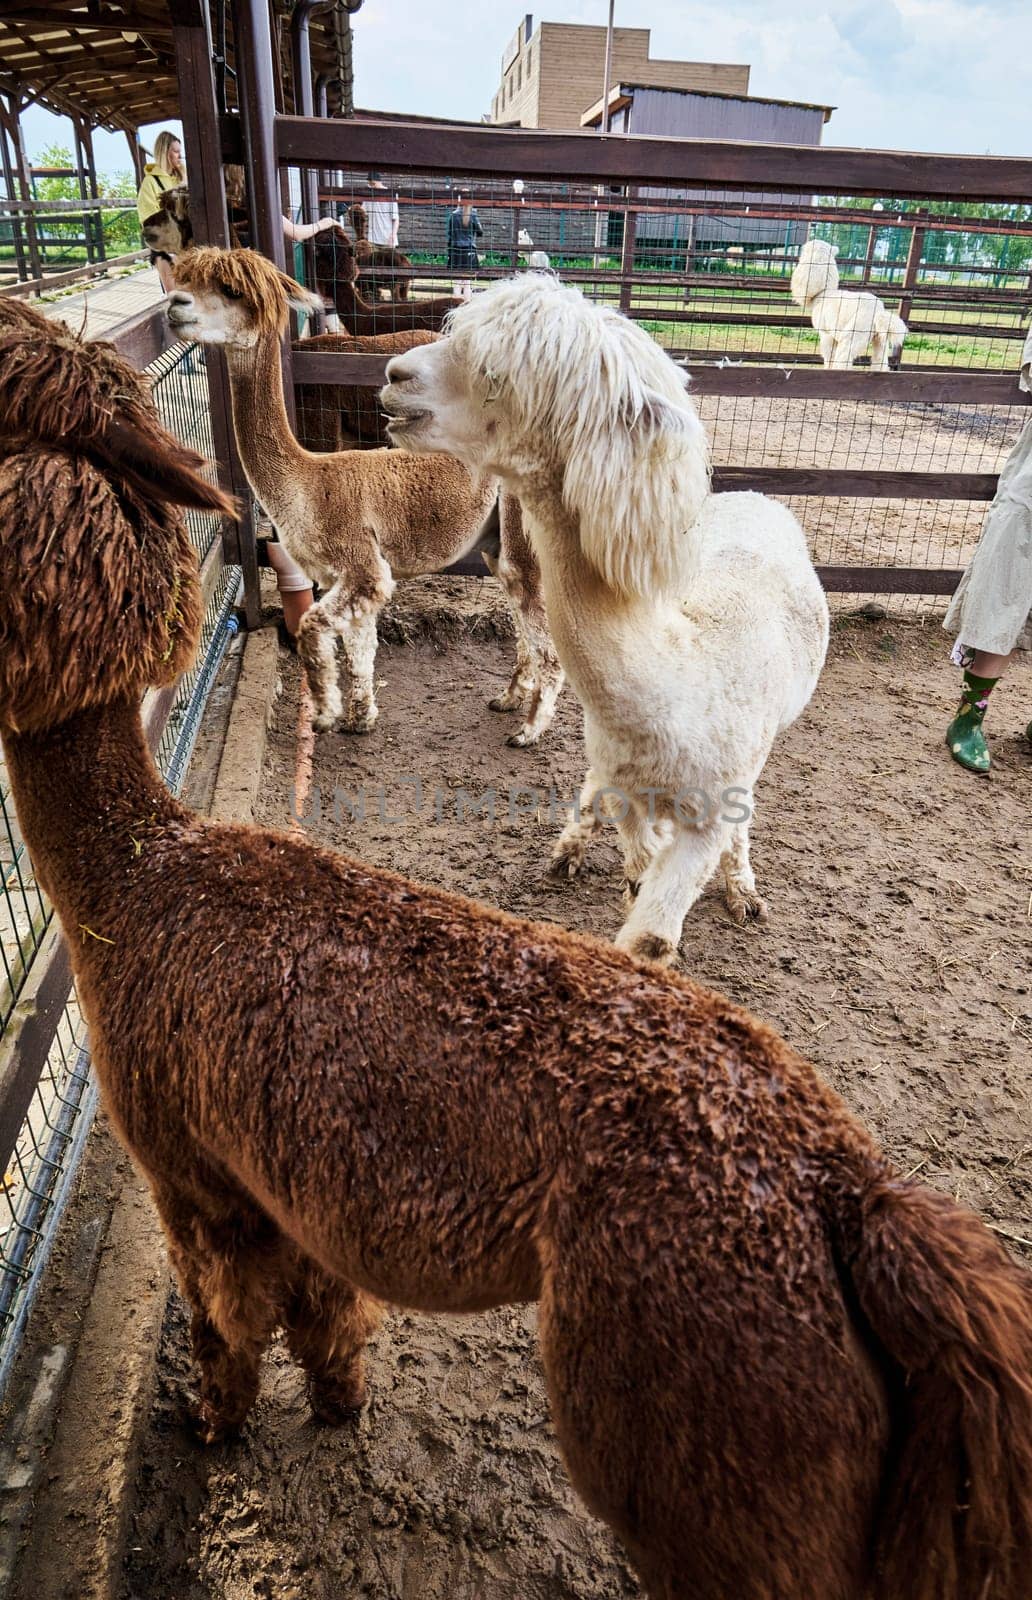 Hairy alpacas standing in a pen at the zoo. High quality photo